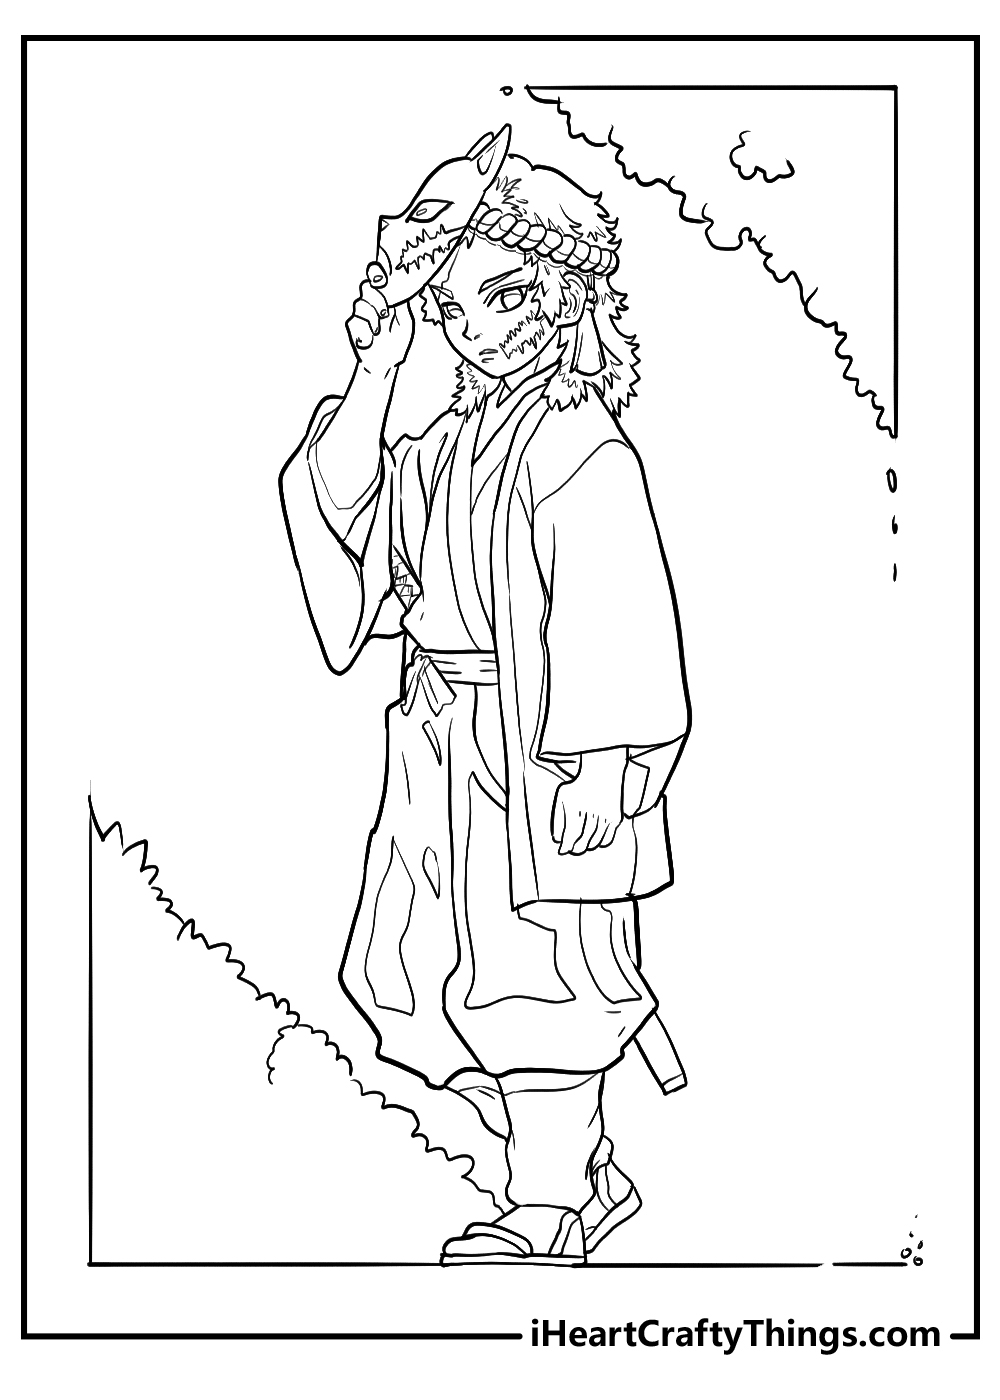 Download or print this amazing coloring page: Demon Slayer Kocho